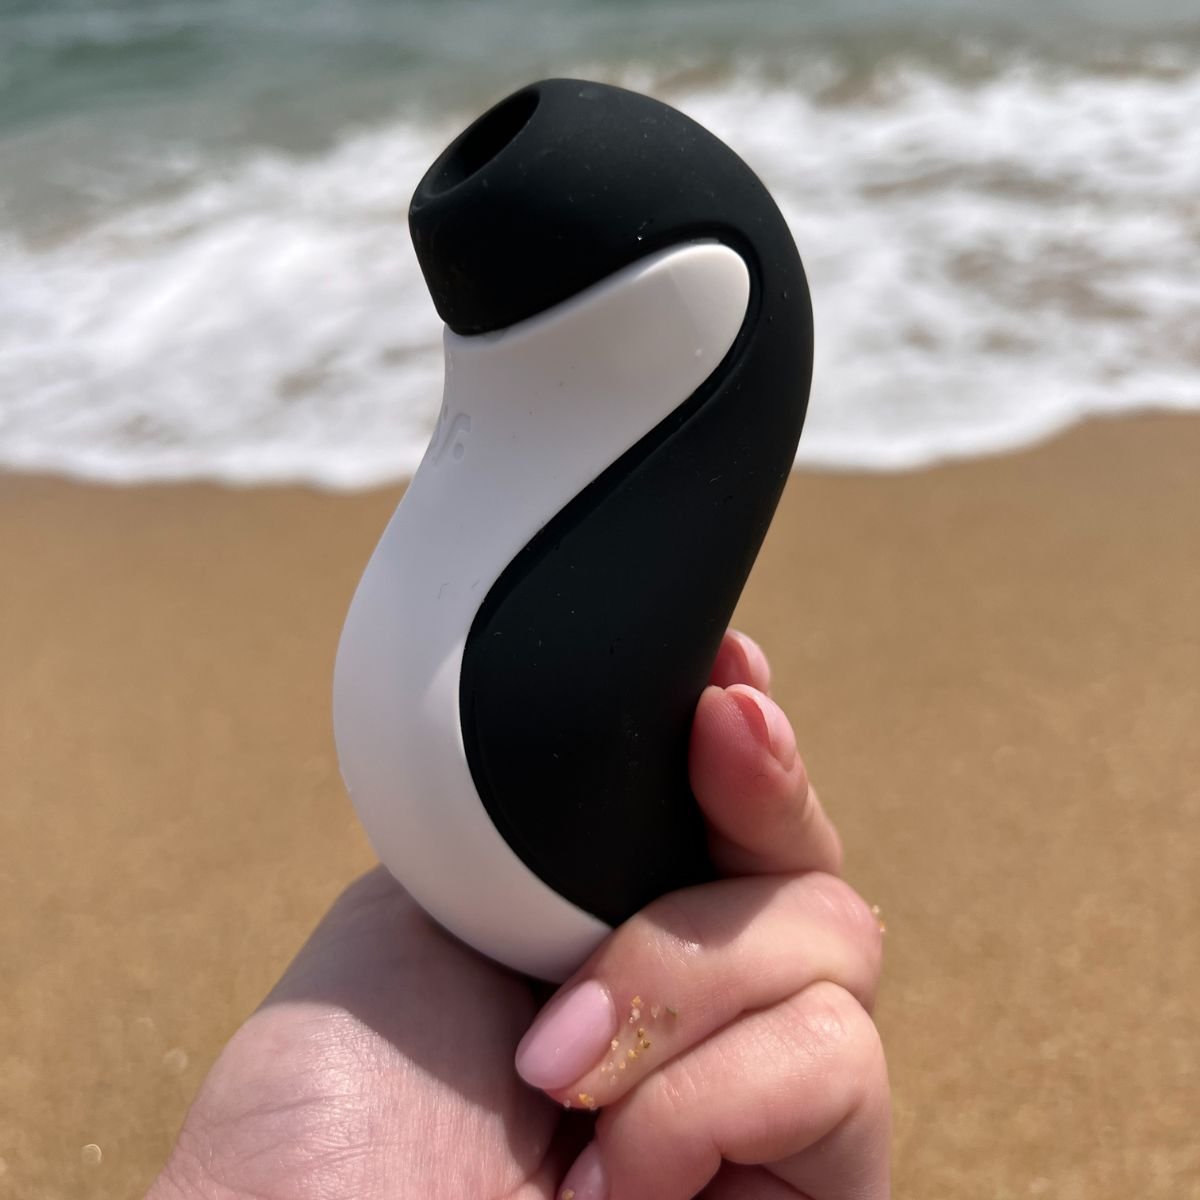 Satisfyer Orca Double Air Pulse Vibrator